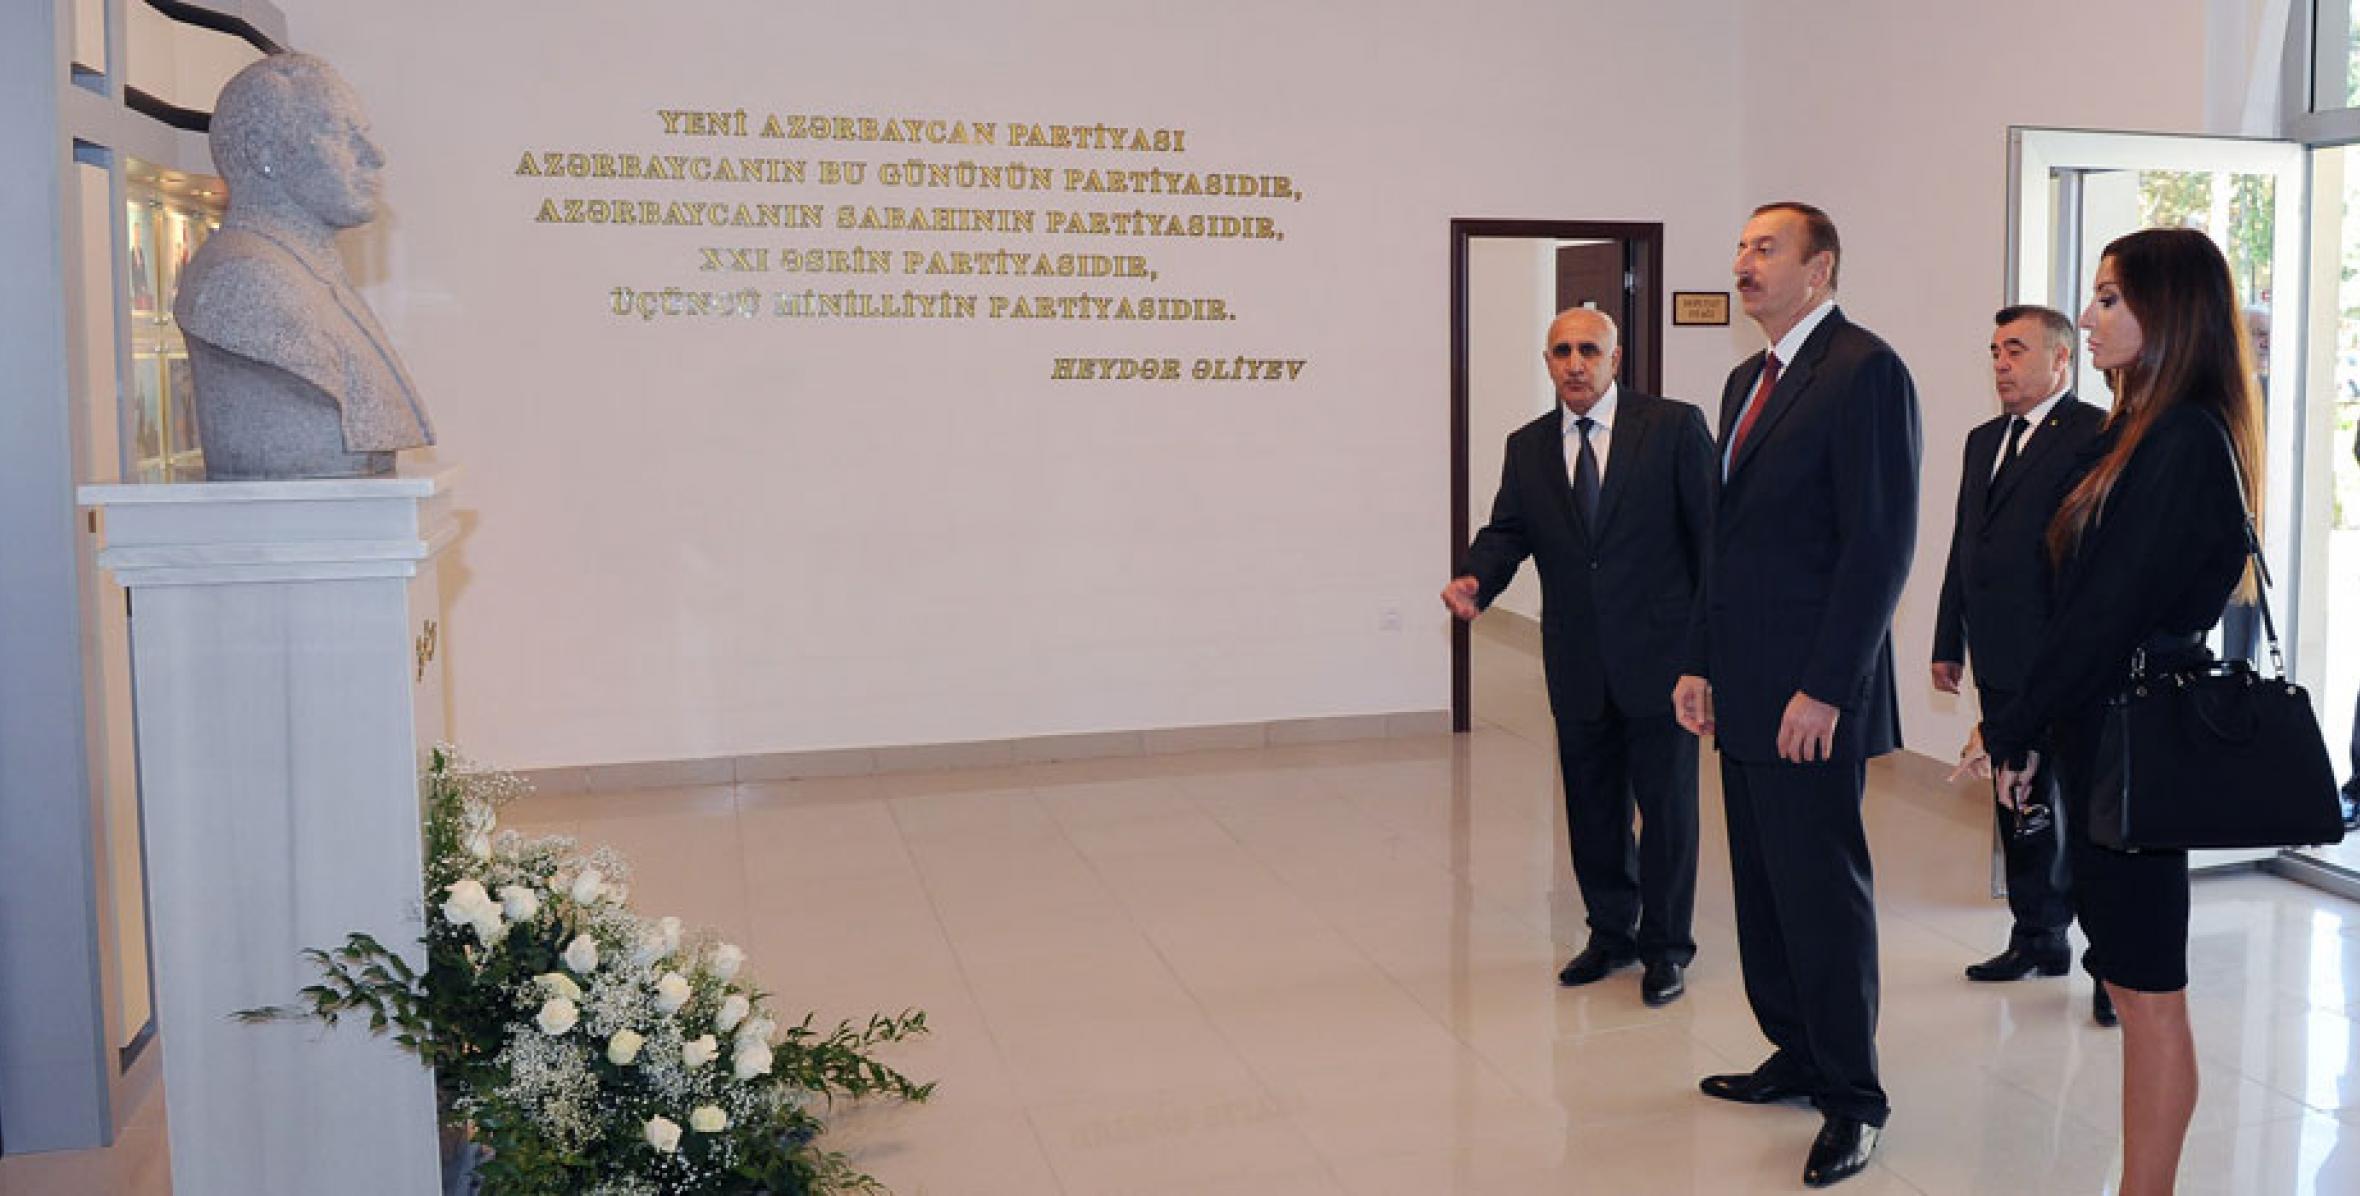 Ilham Aliyev attended the opening ceremony of the new administrative building of YAP Mingachevir city organization